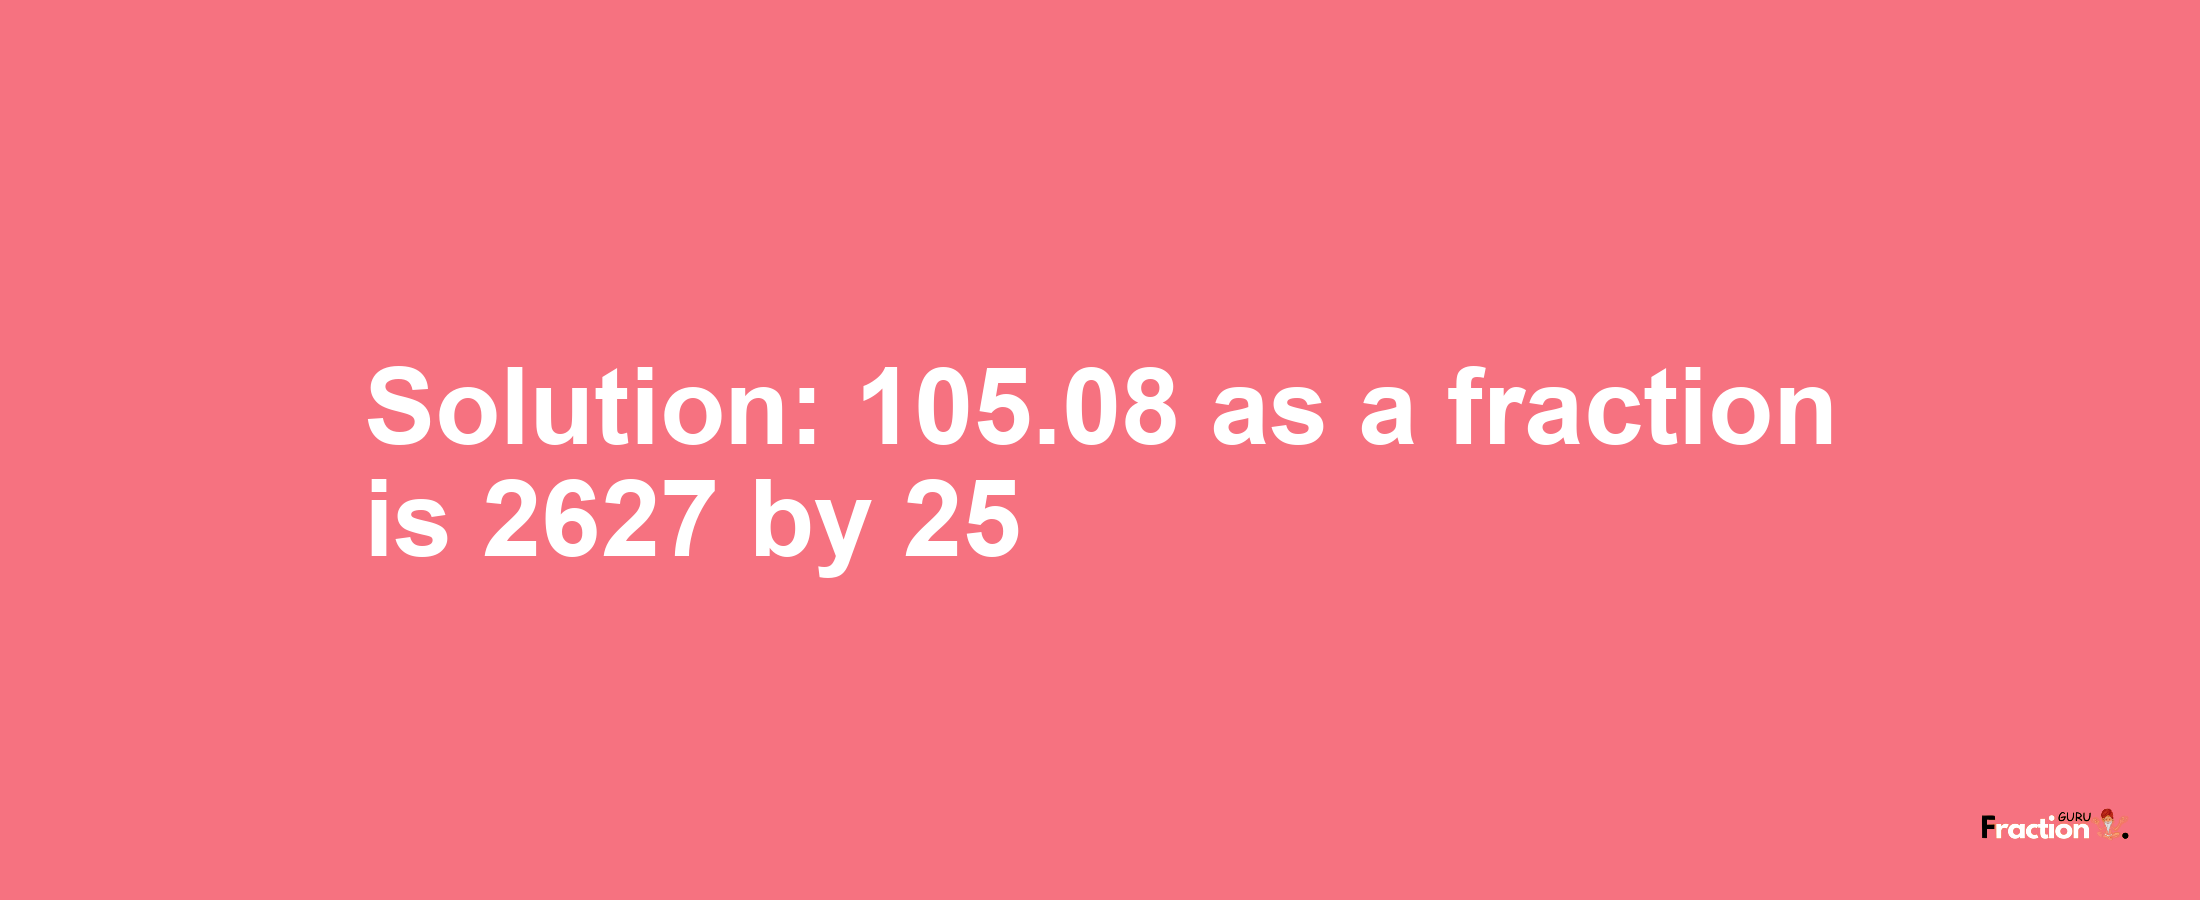 Solution:105.08 as a fraction is 2627/25